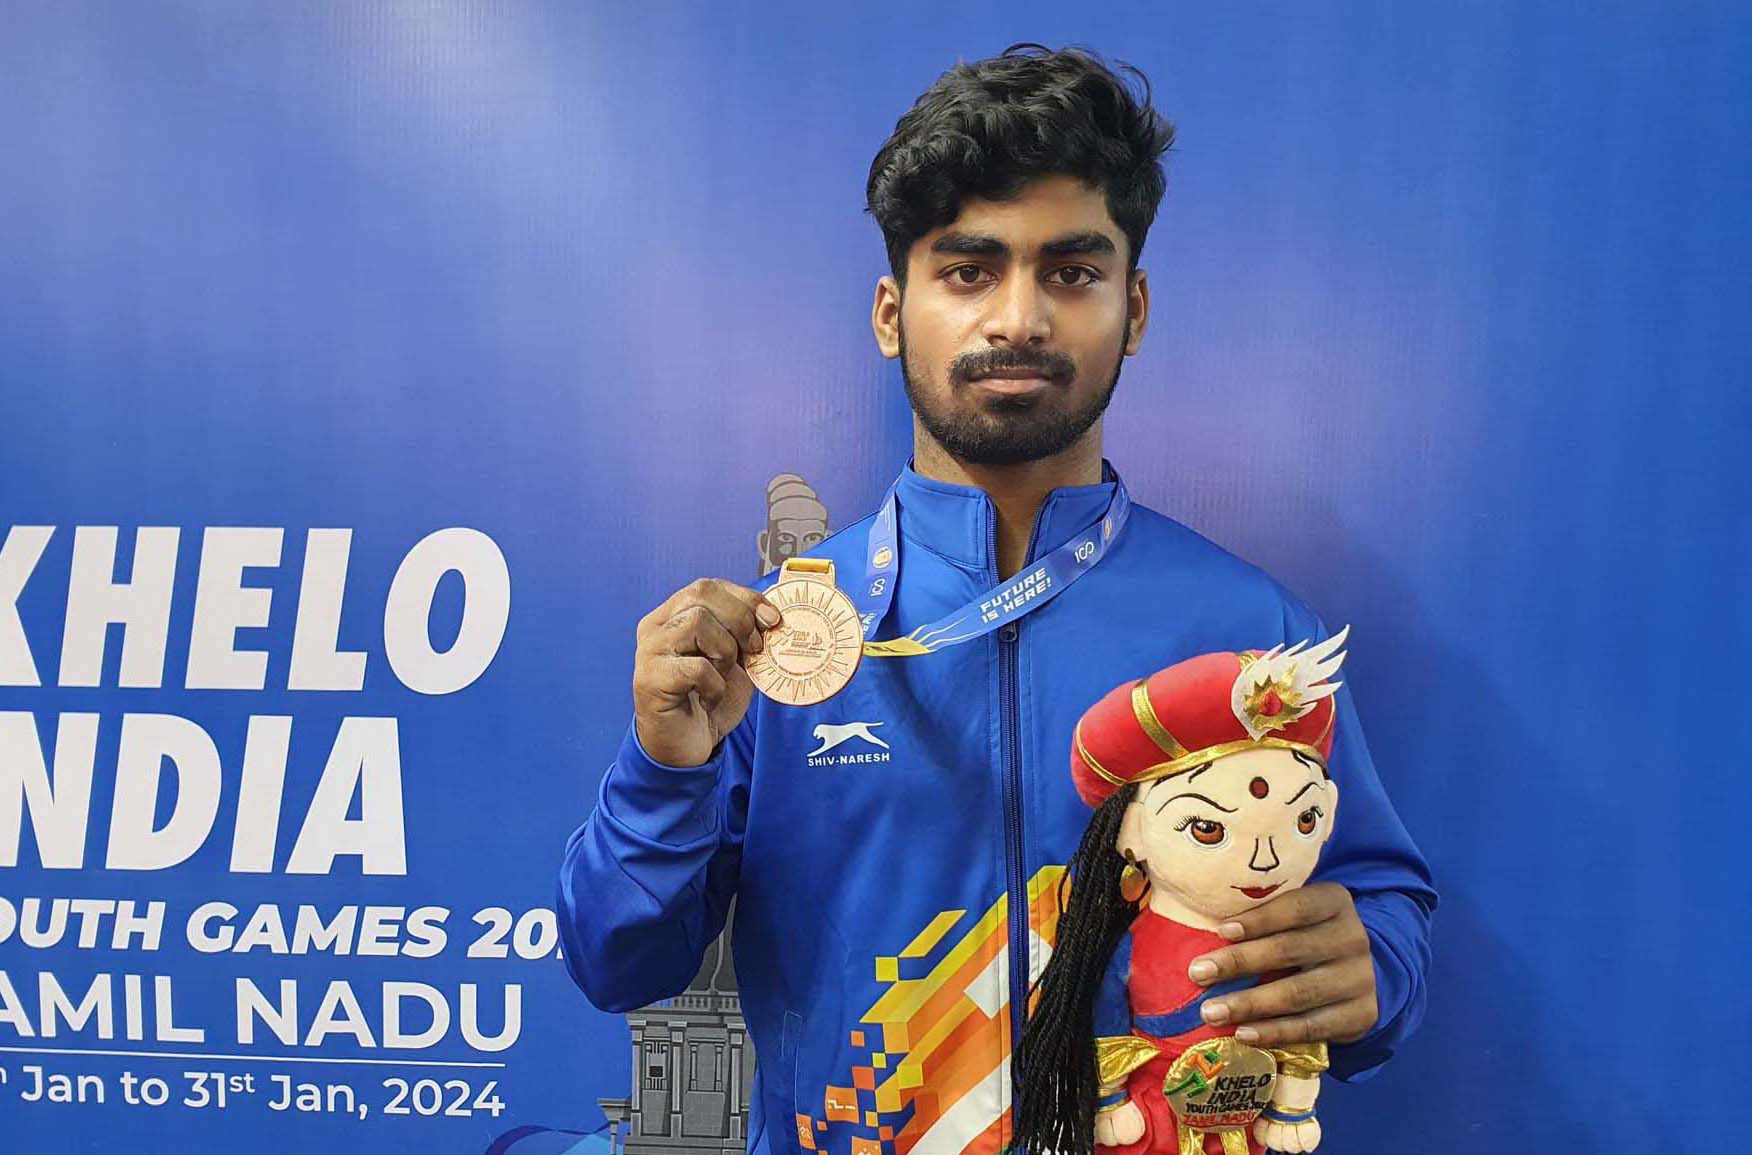 Odisha weightlifter Deepak Pradhan poses with his bronze medal at Khelo India Youth Games in Chennai on 27 January 2024.